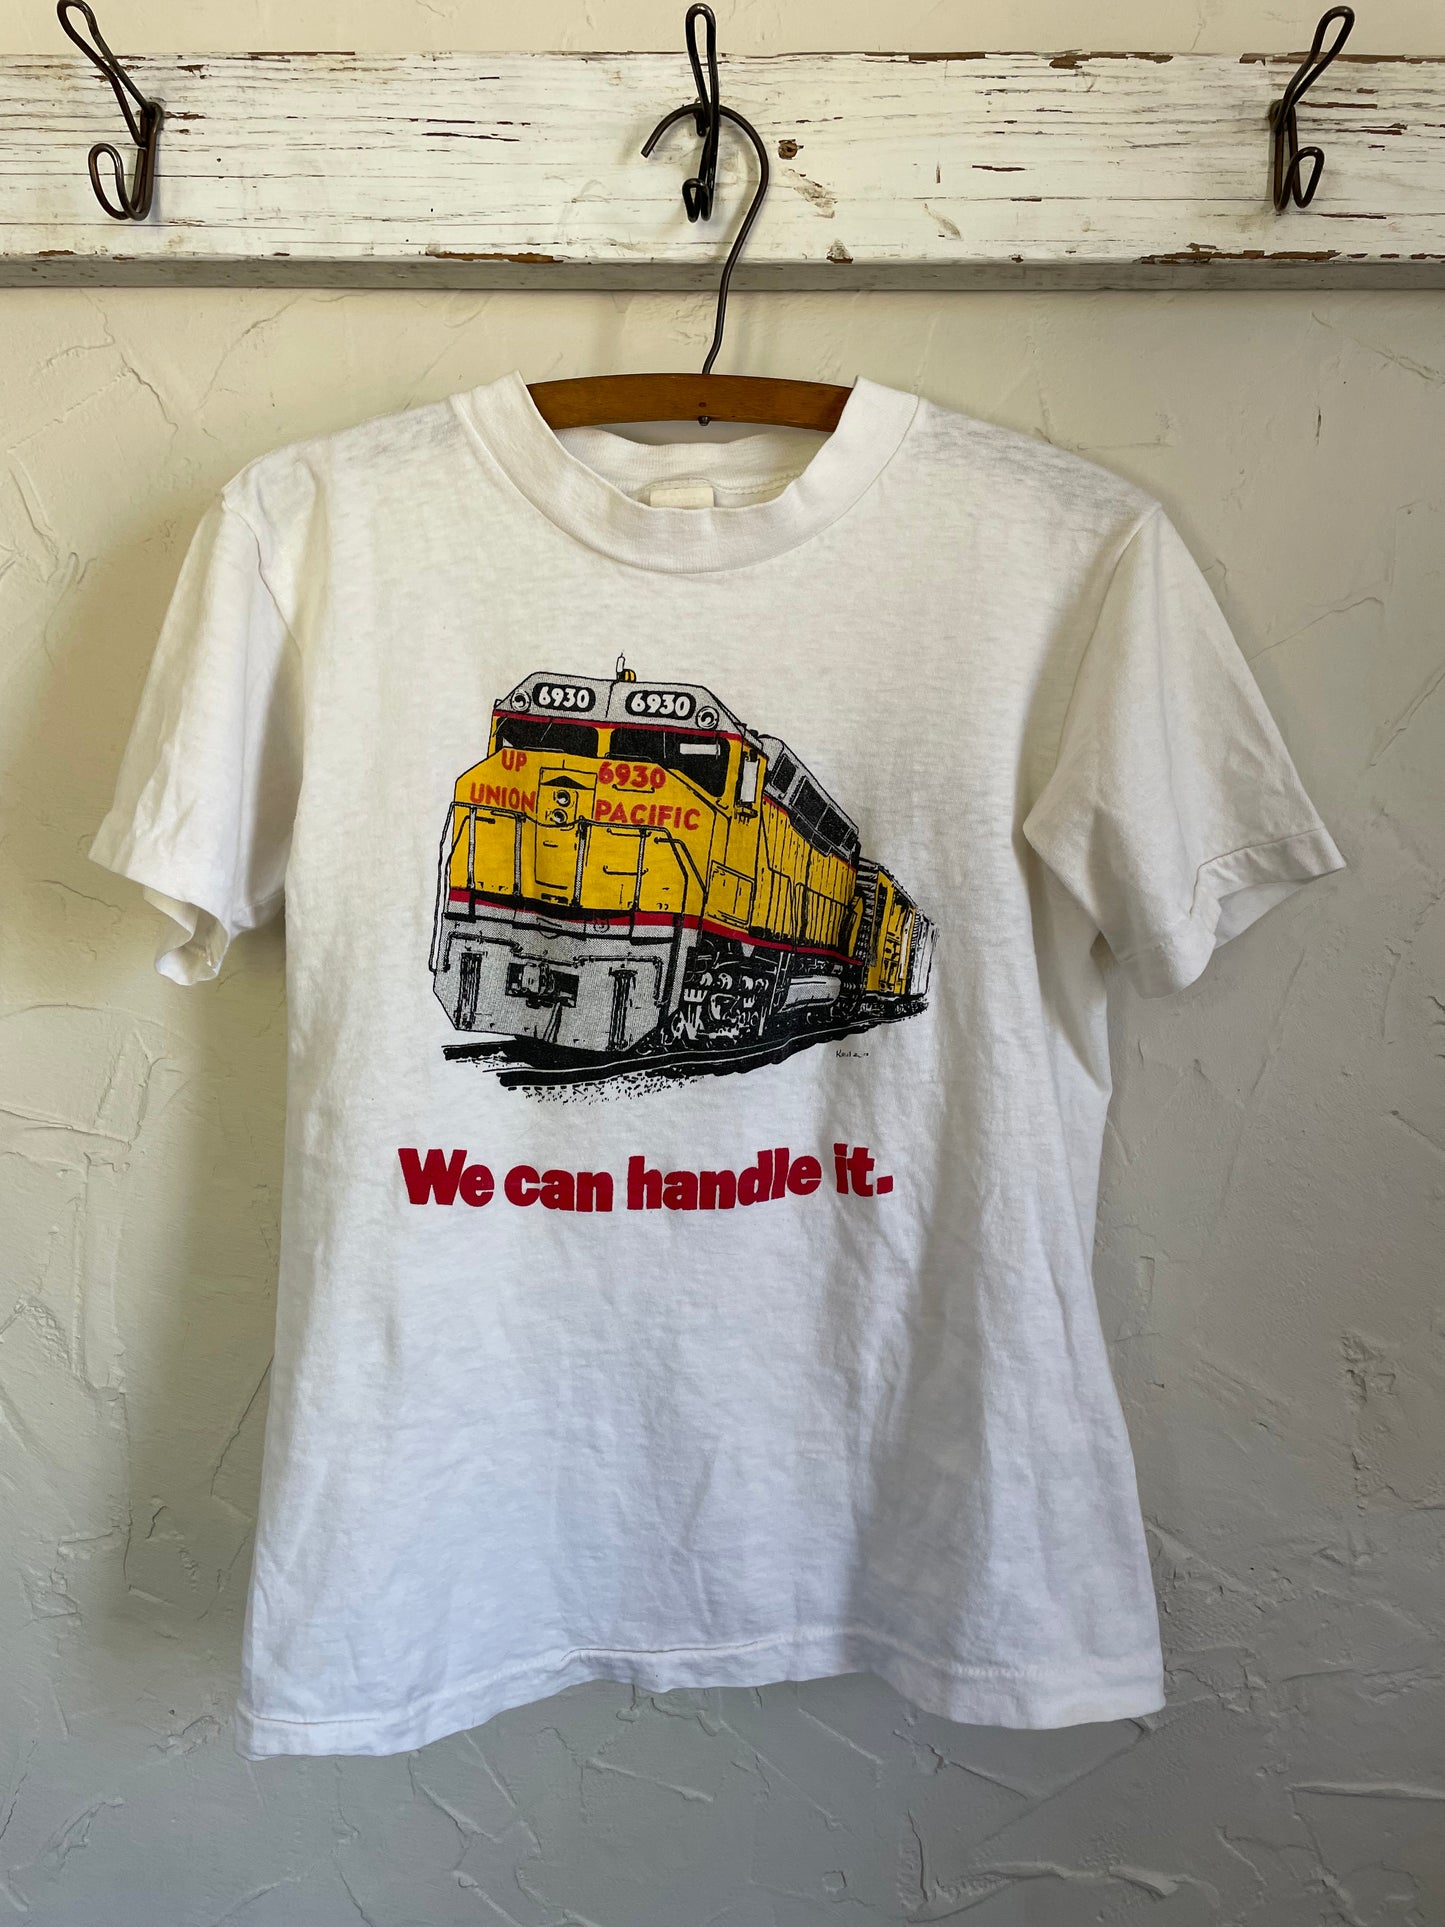 70s Union Pacific “We Can Handle It” Tee